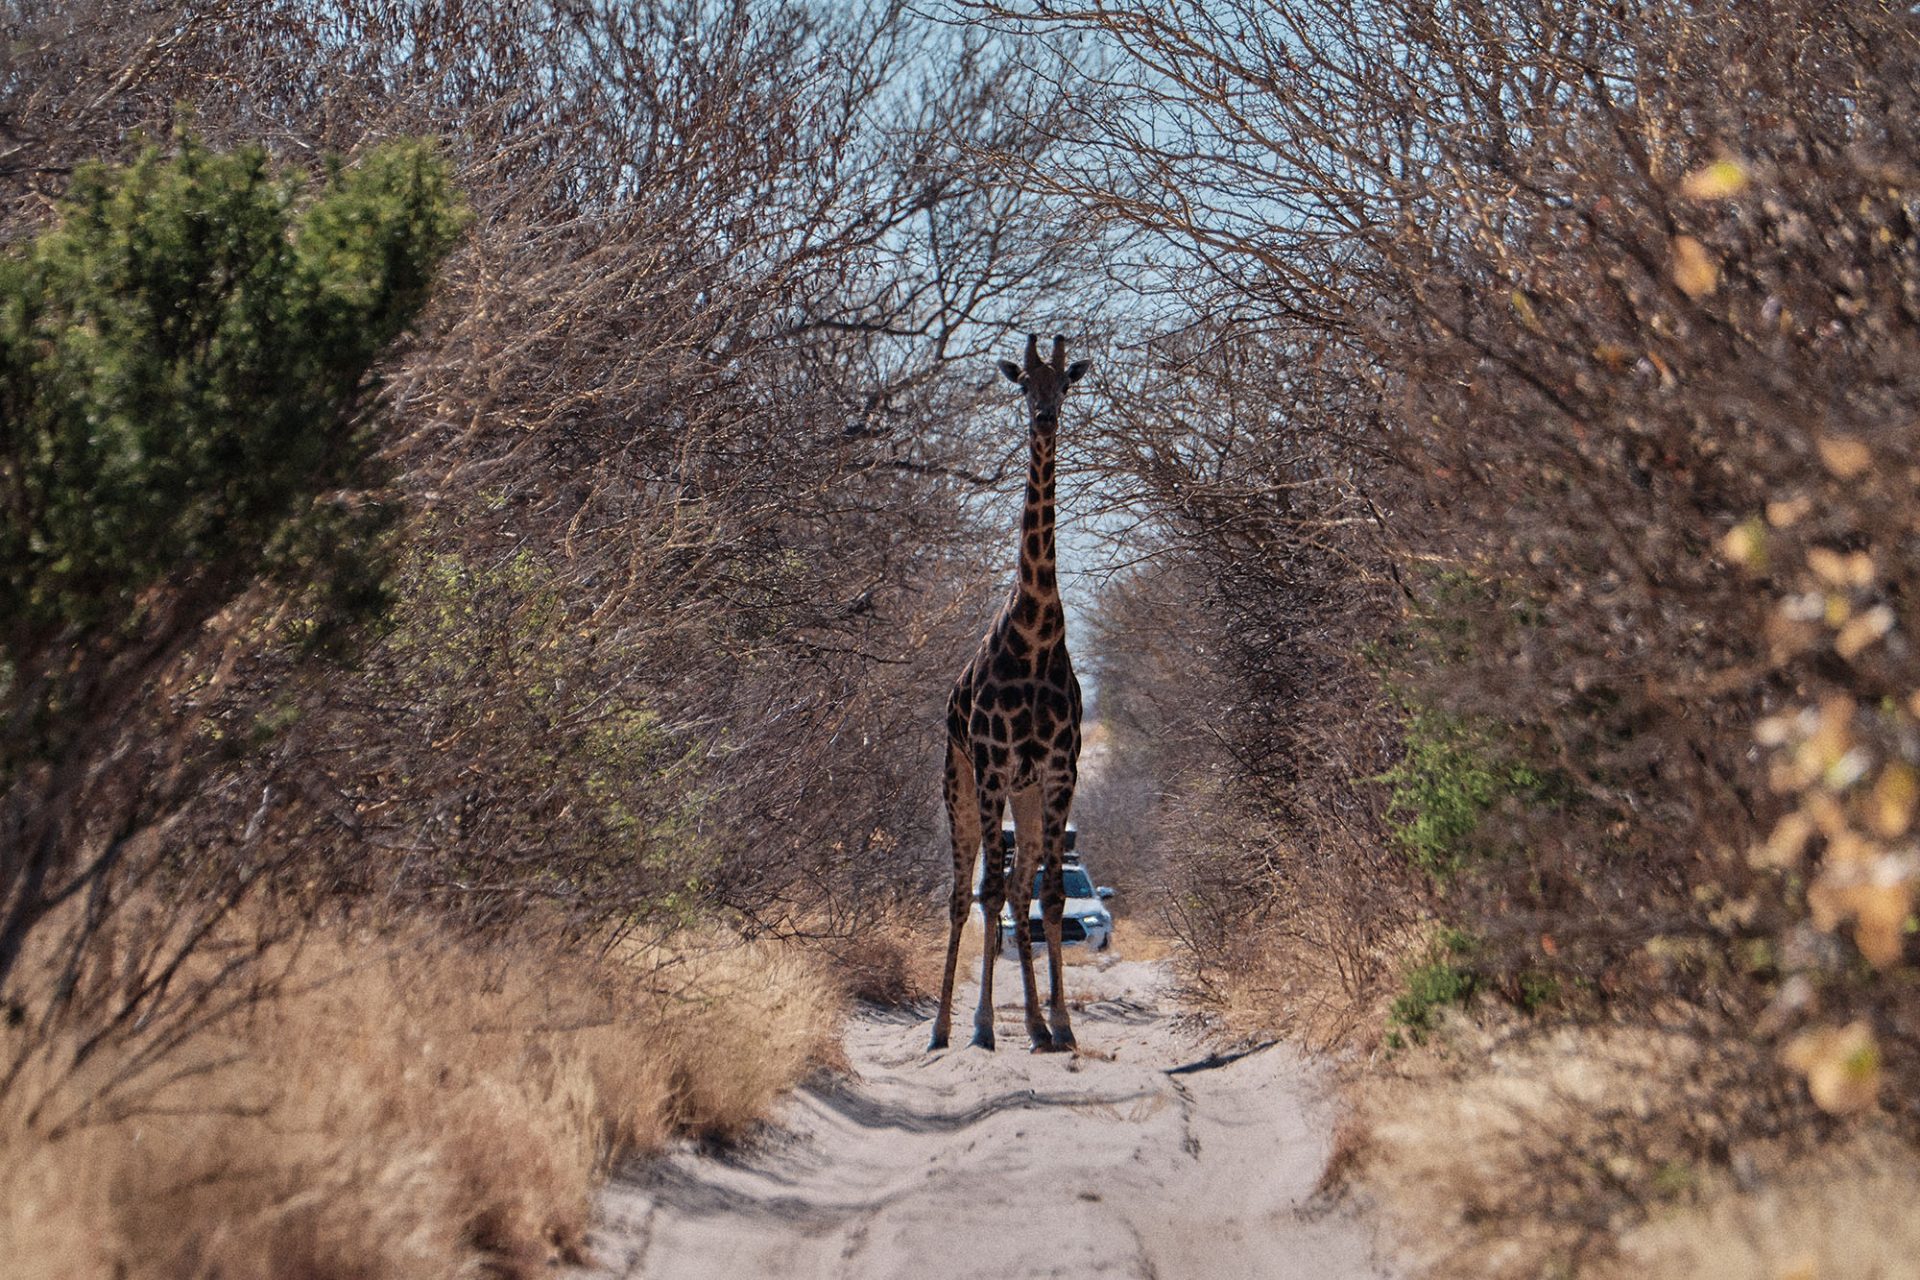 A giraffe standing in the middle of the road.